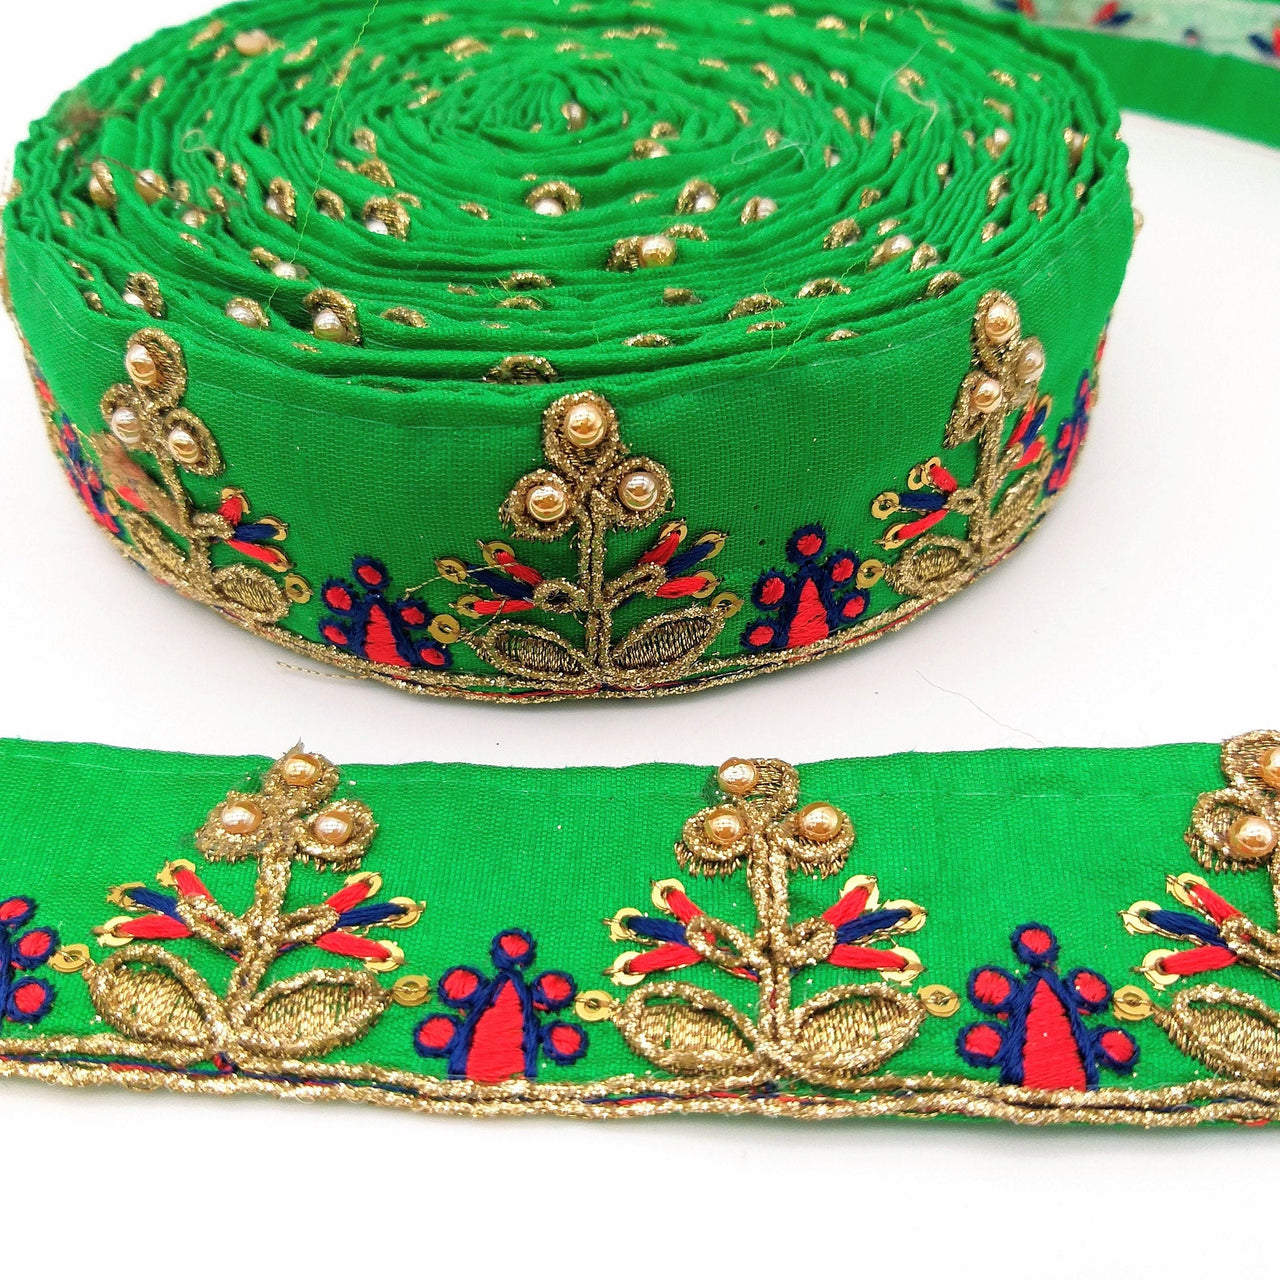 Green Art Silk Trim In Red And Gold Embroidery, Approx. 32mm wide, Decorative Trim